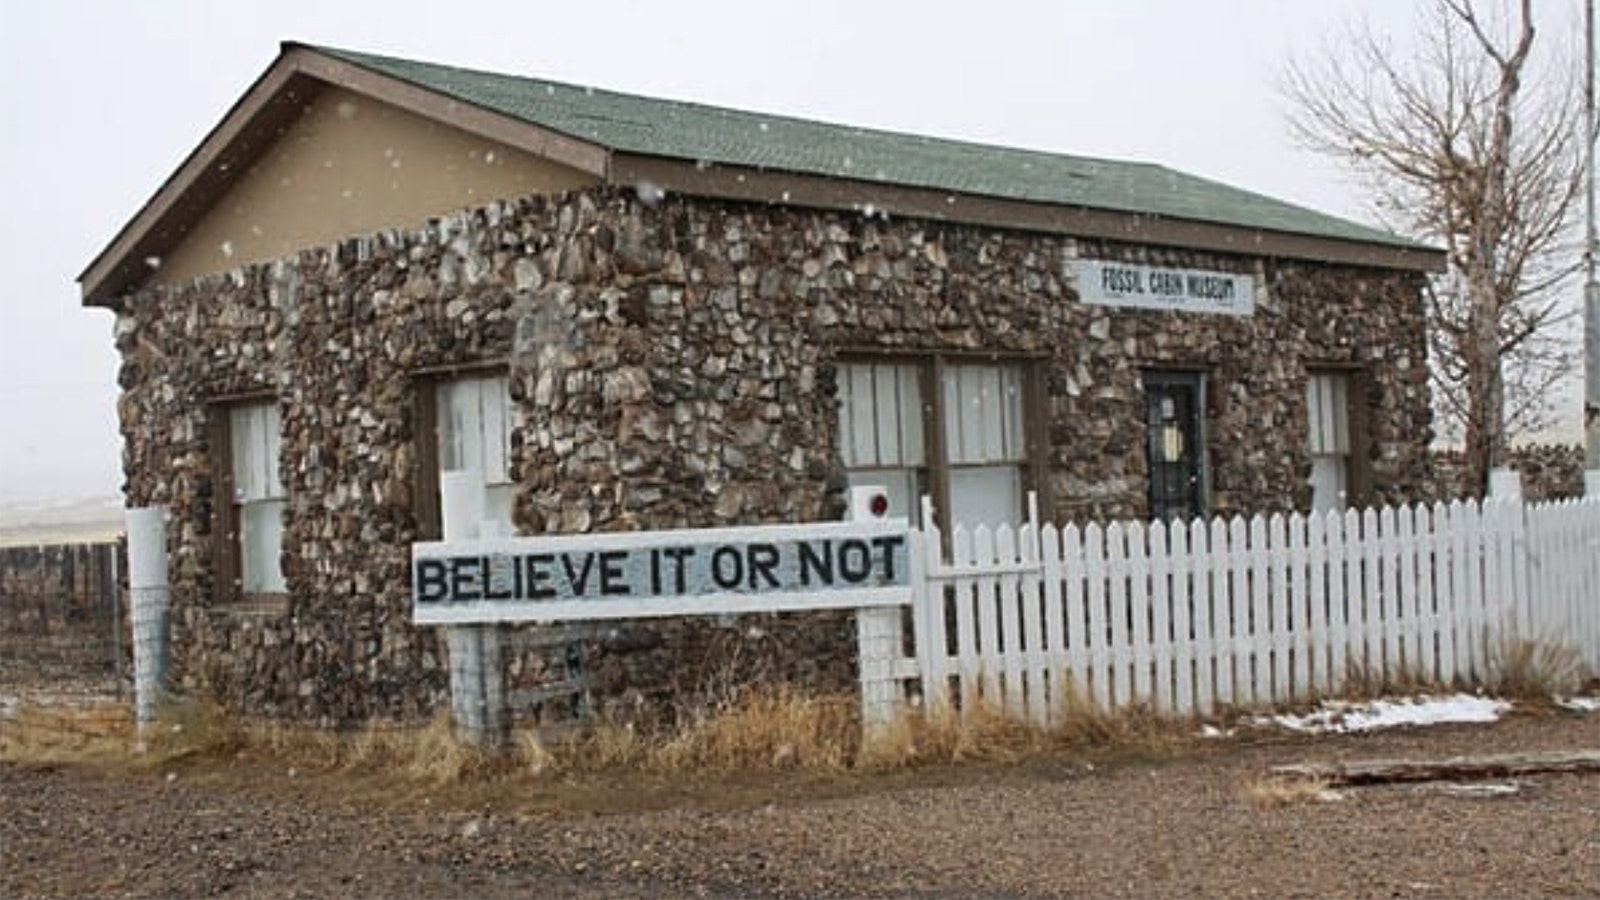 The Wyoming Fossil Cabin is expected to be moved to its new home in Medicine Bow this year.